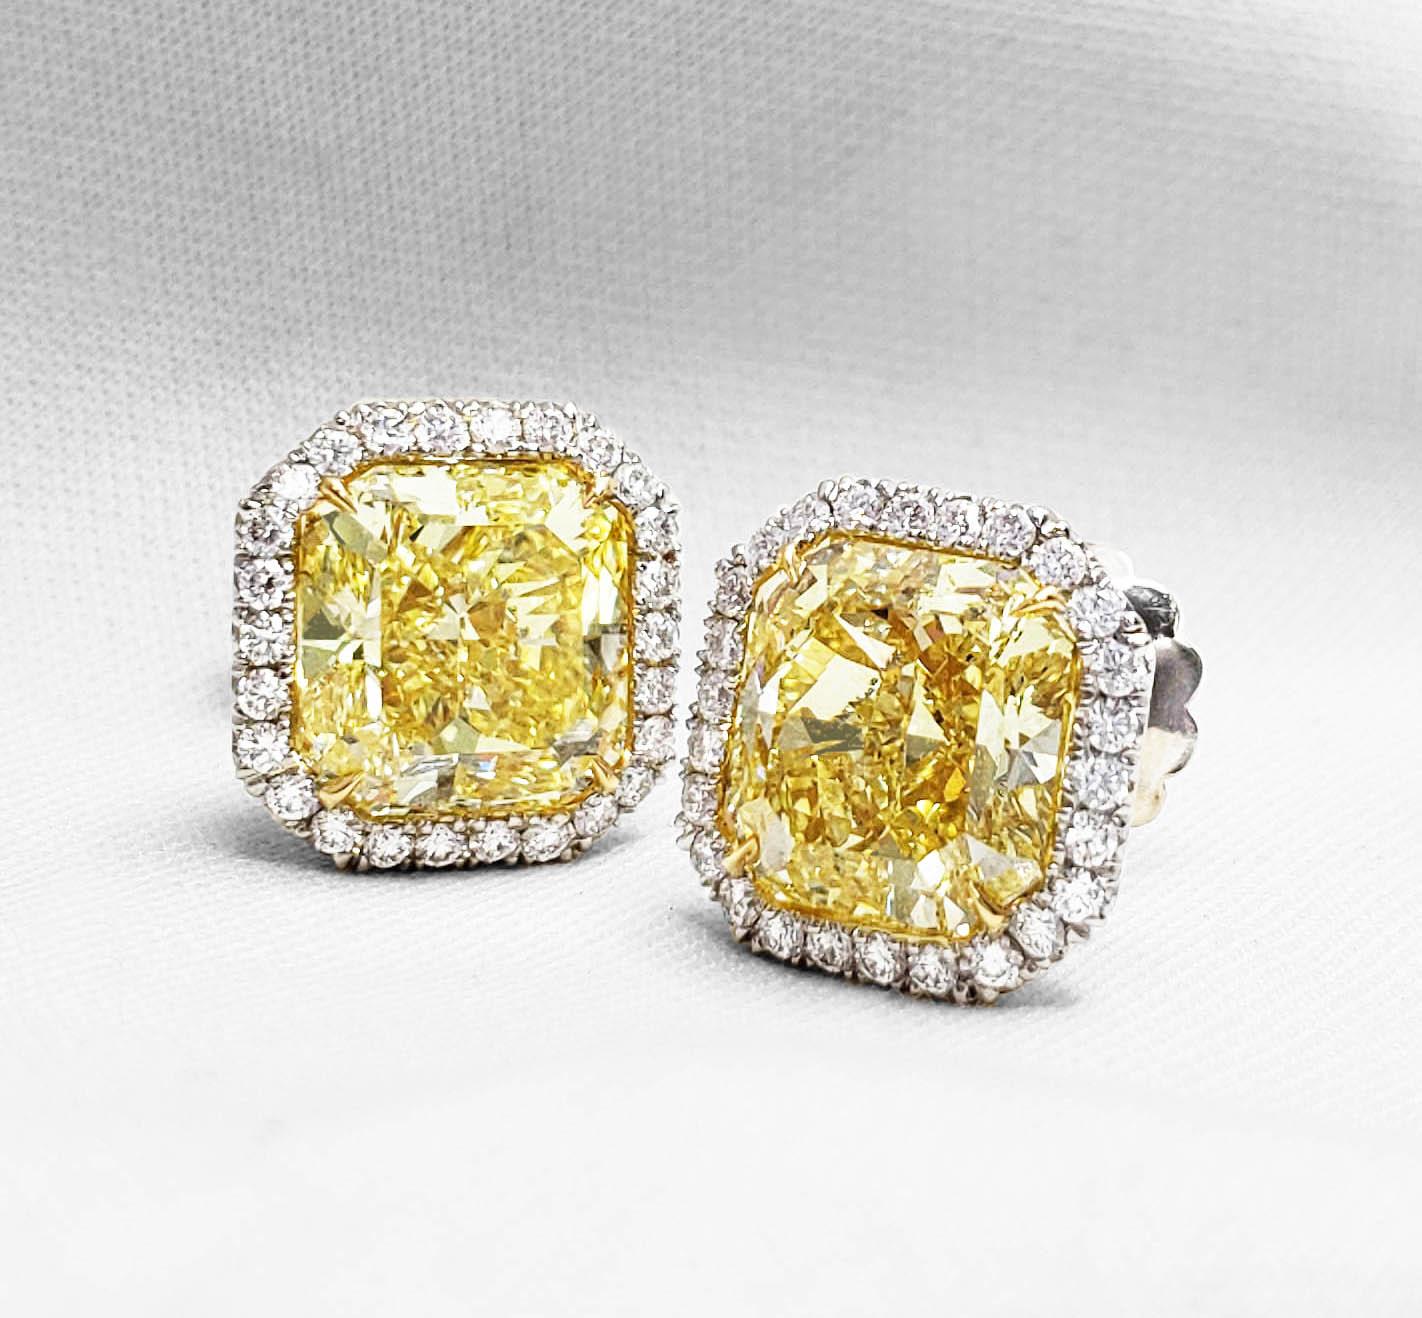 Natural GIA-certified fancy intense yellow radiant-cut diamond earrings, featuring 4.79 and 4.94 carats respectively, on a platinum and 18k yellow gold setting. Classic radiant-cut fancy intense yellow diamond earrings with VS2 clarity, with 52